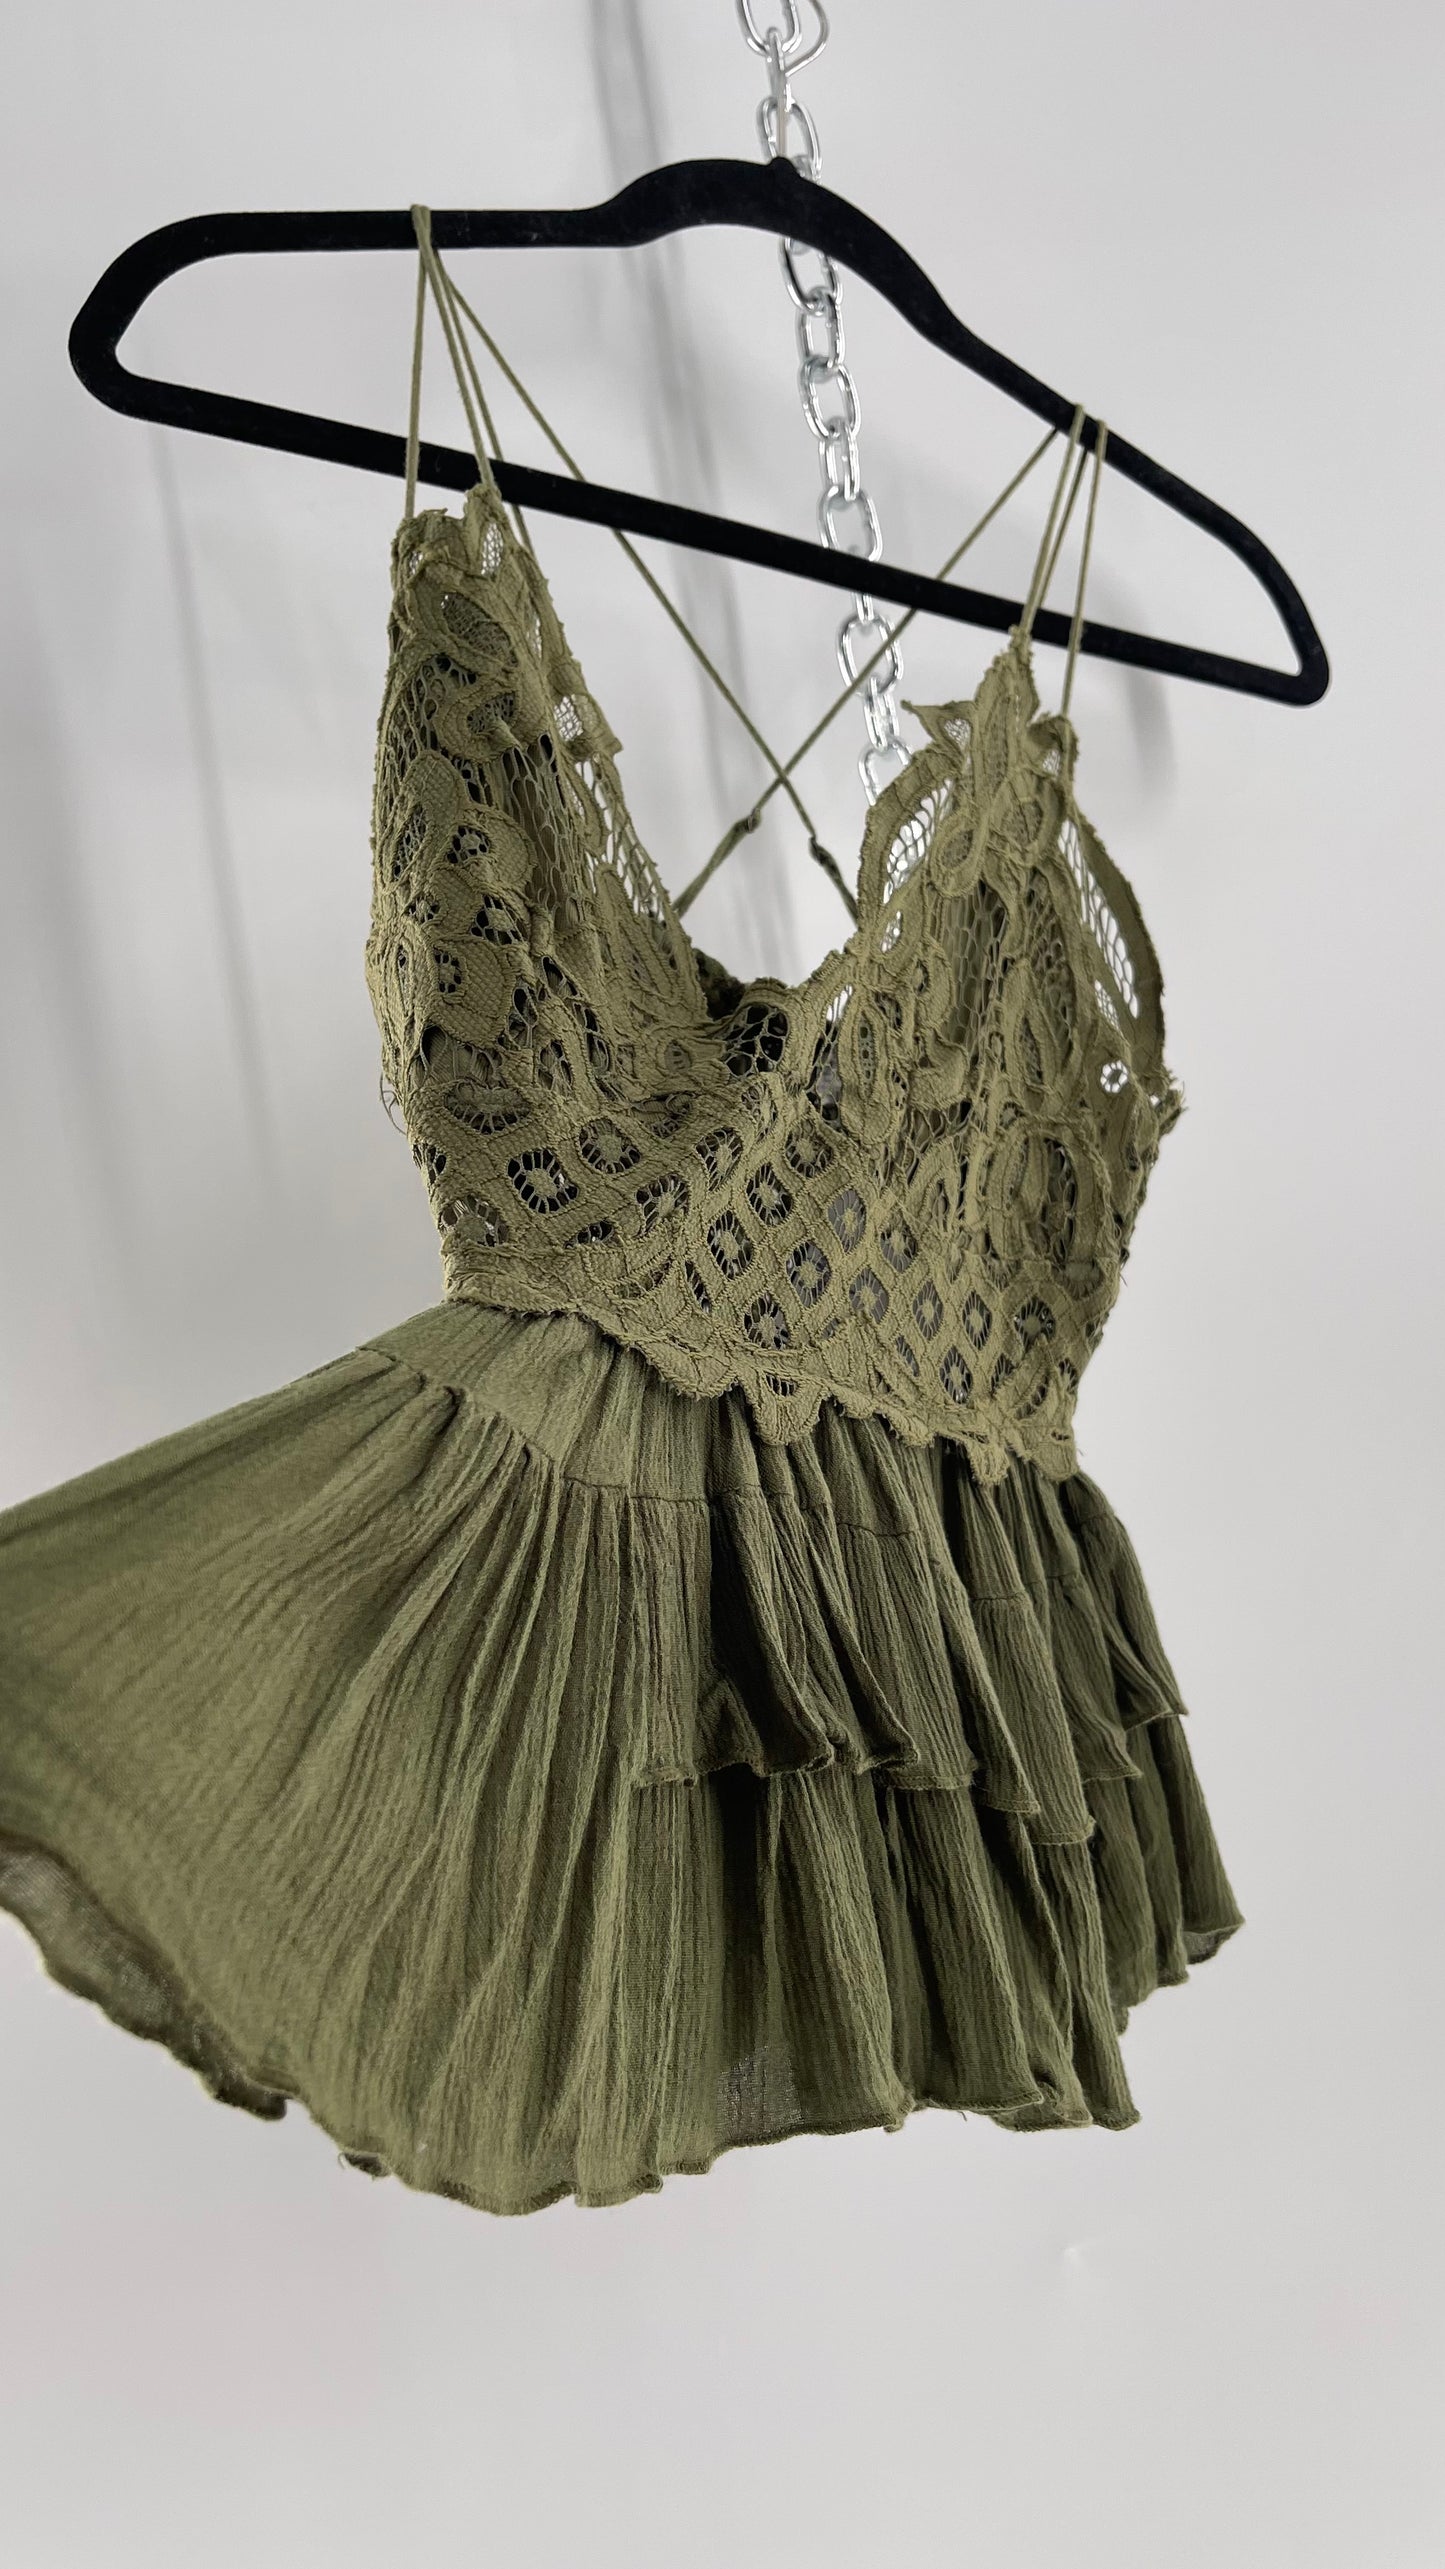 Free People Army Green Lace Bralette Top with Ruffled Hem (Large)